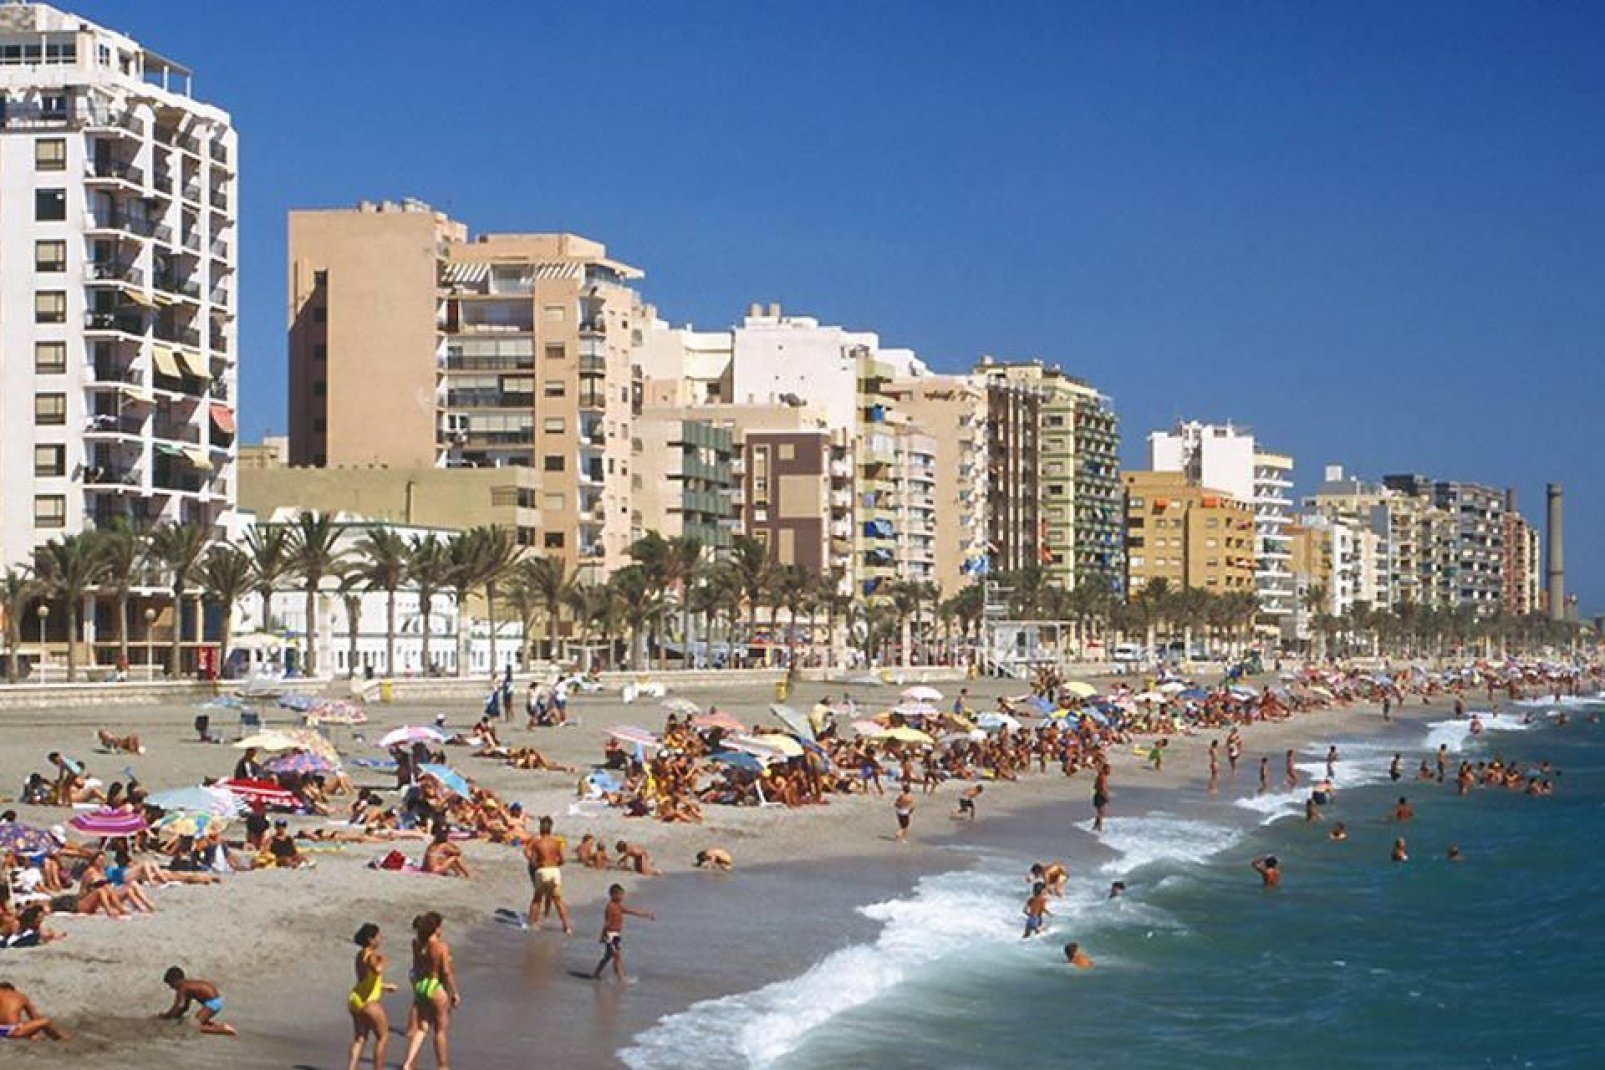 It is possible to practice many water sports and activities in Almeria, like scuba diving, windsurfing and kite-surfing.